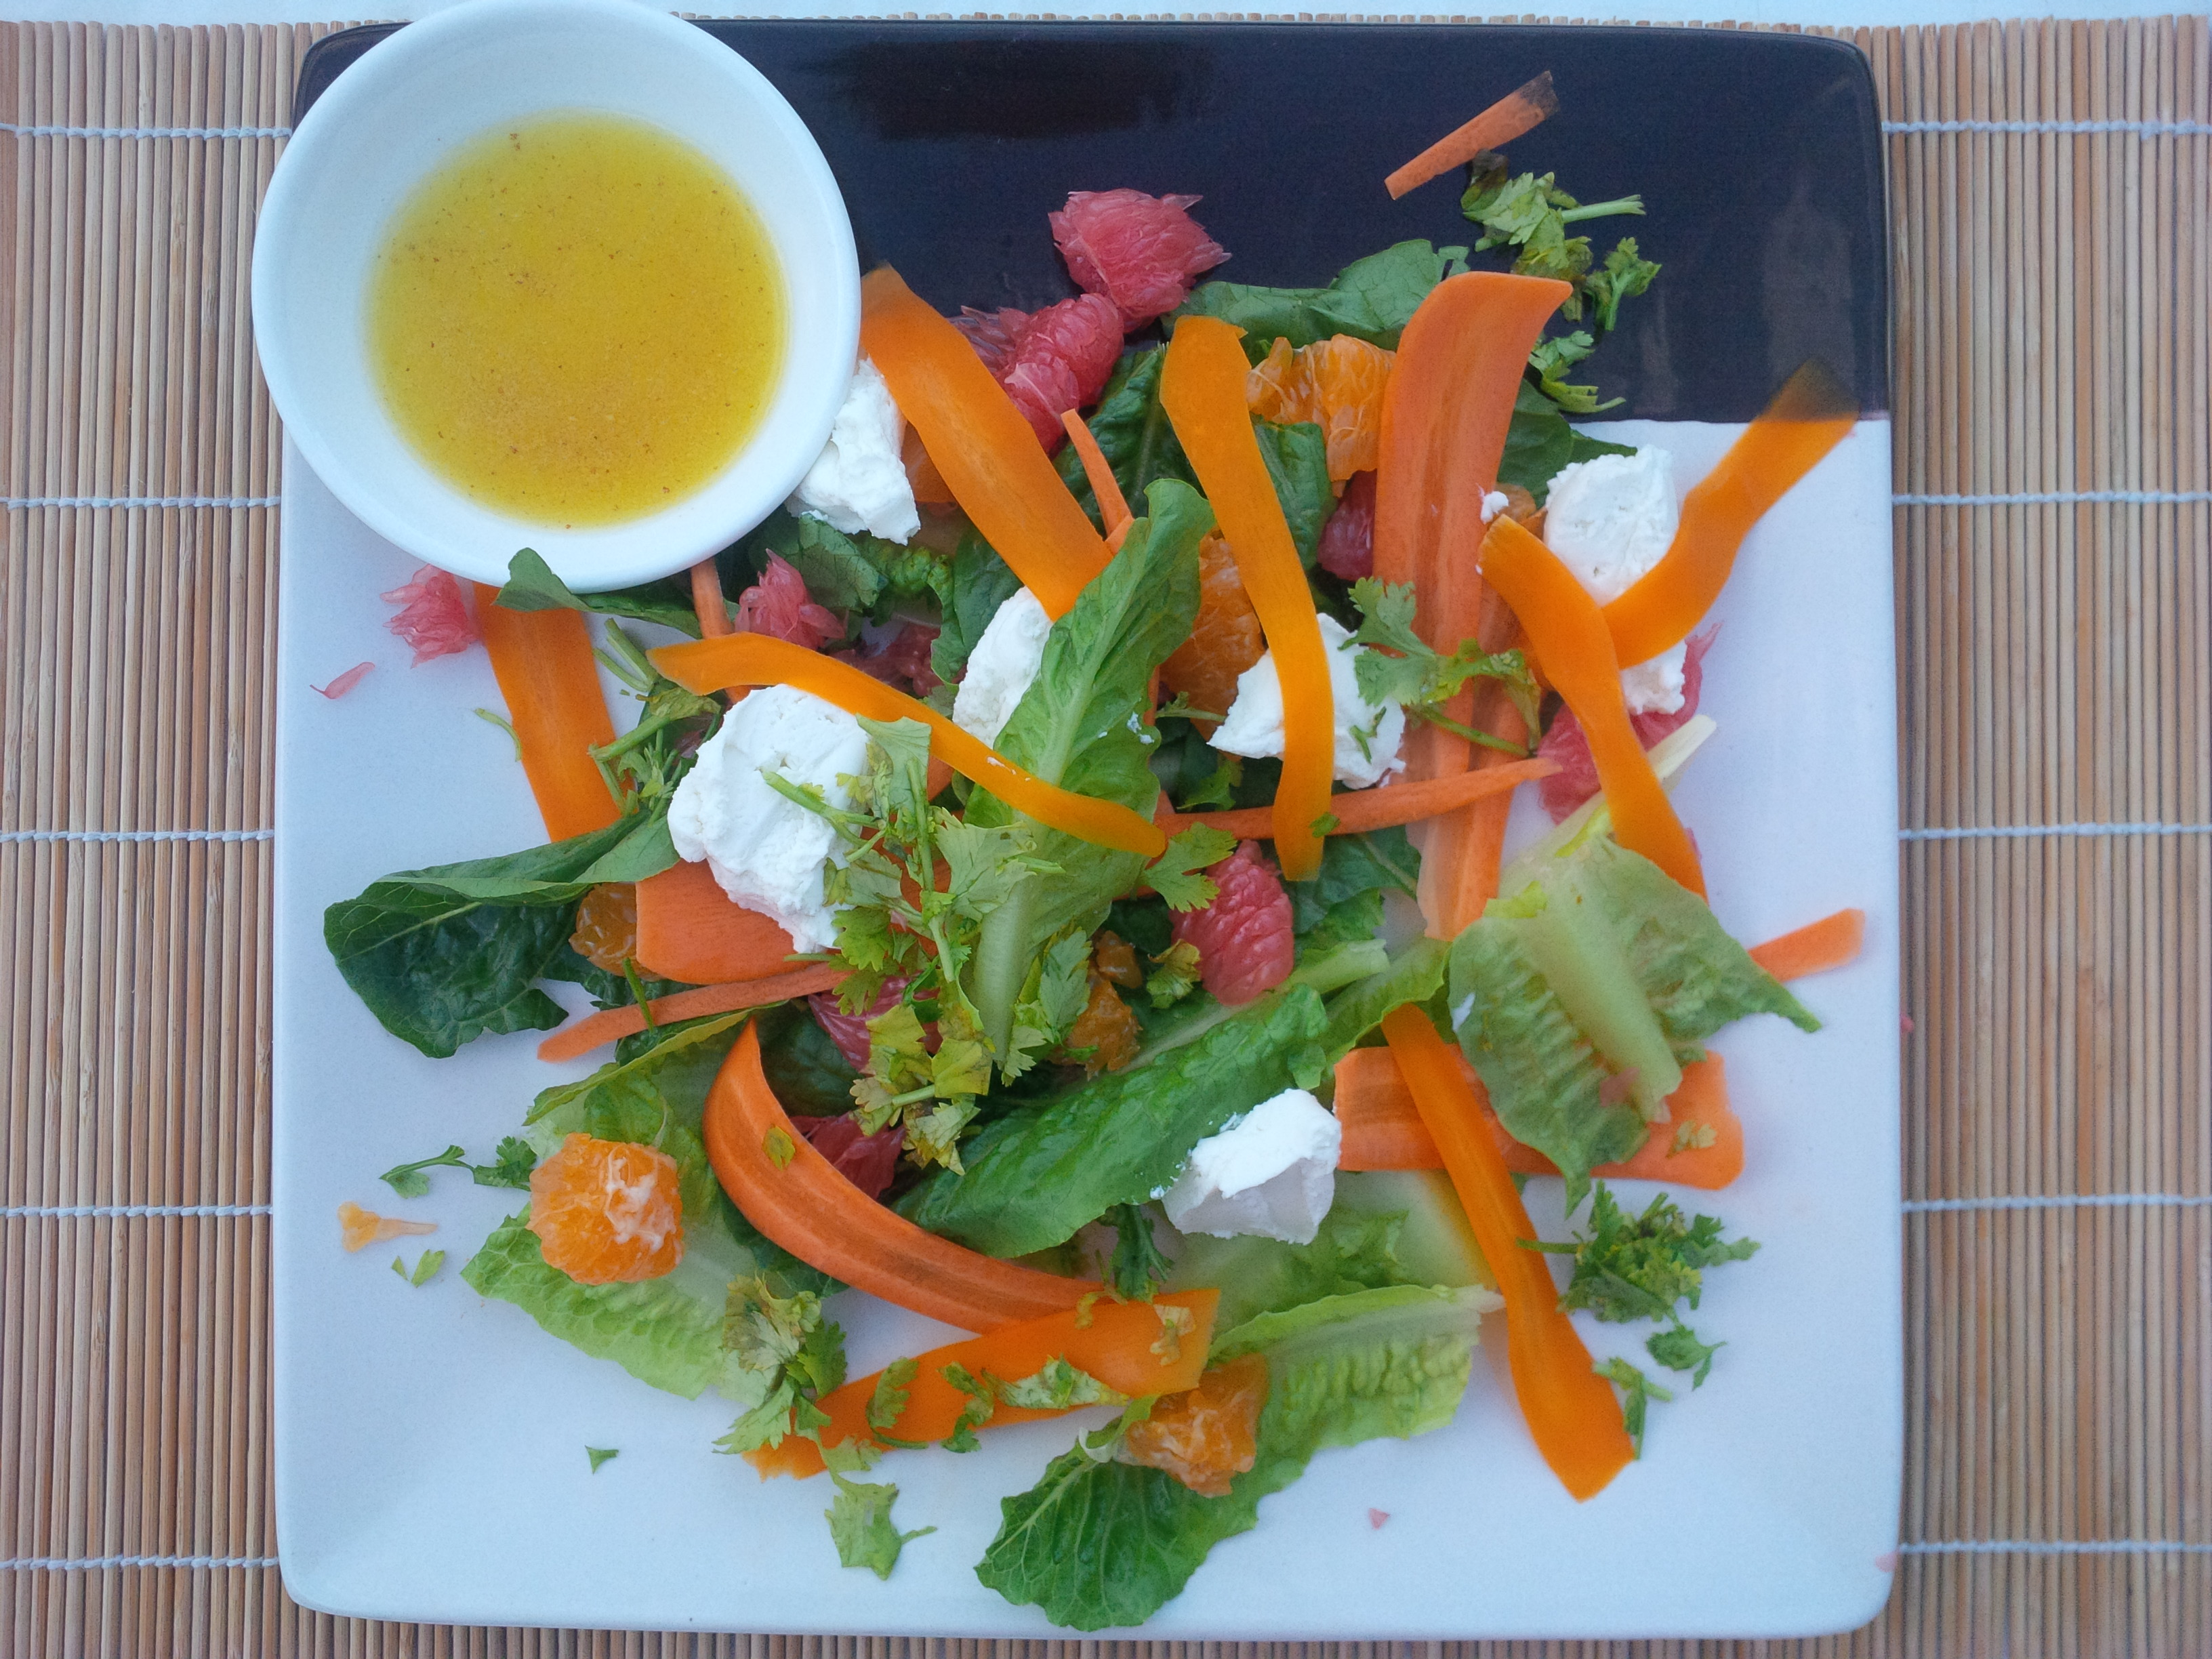 Recipe: Carrot and citrus salad with weissbier dressing